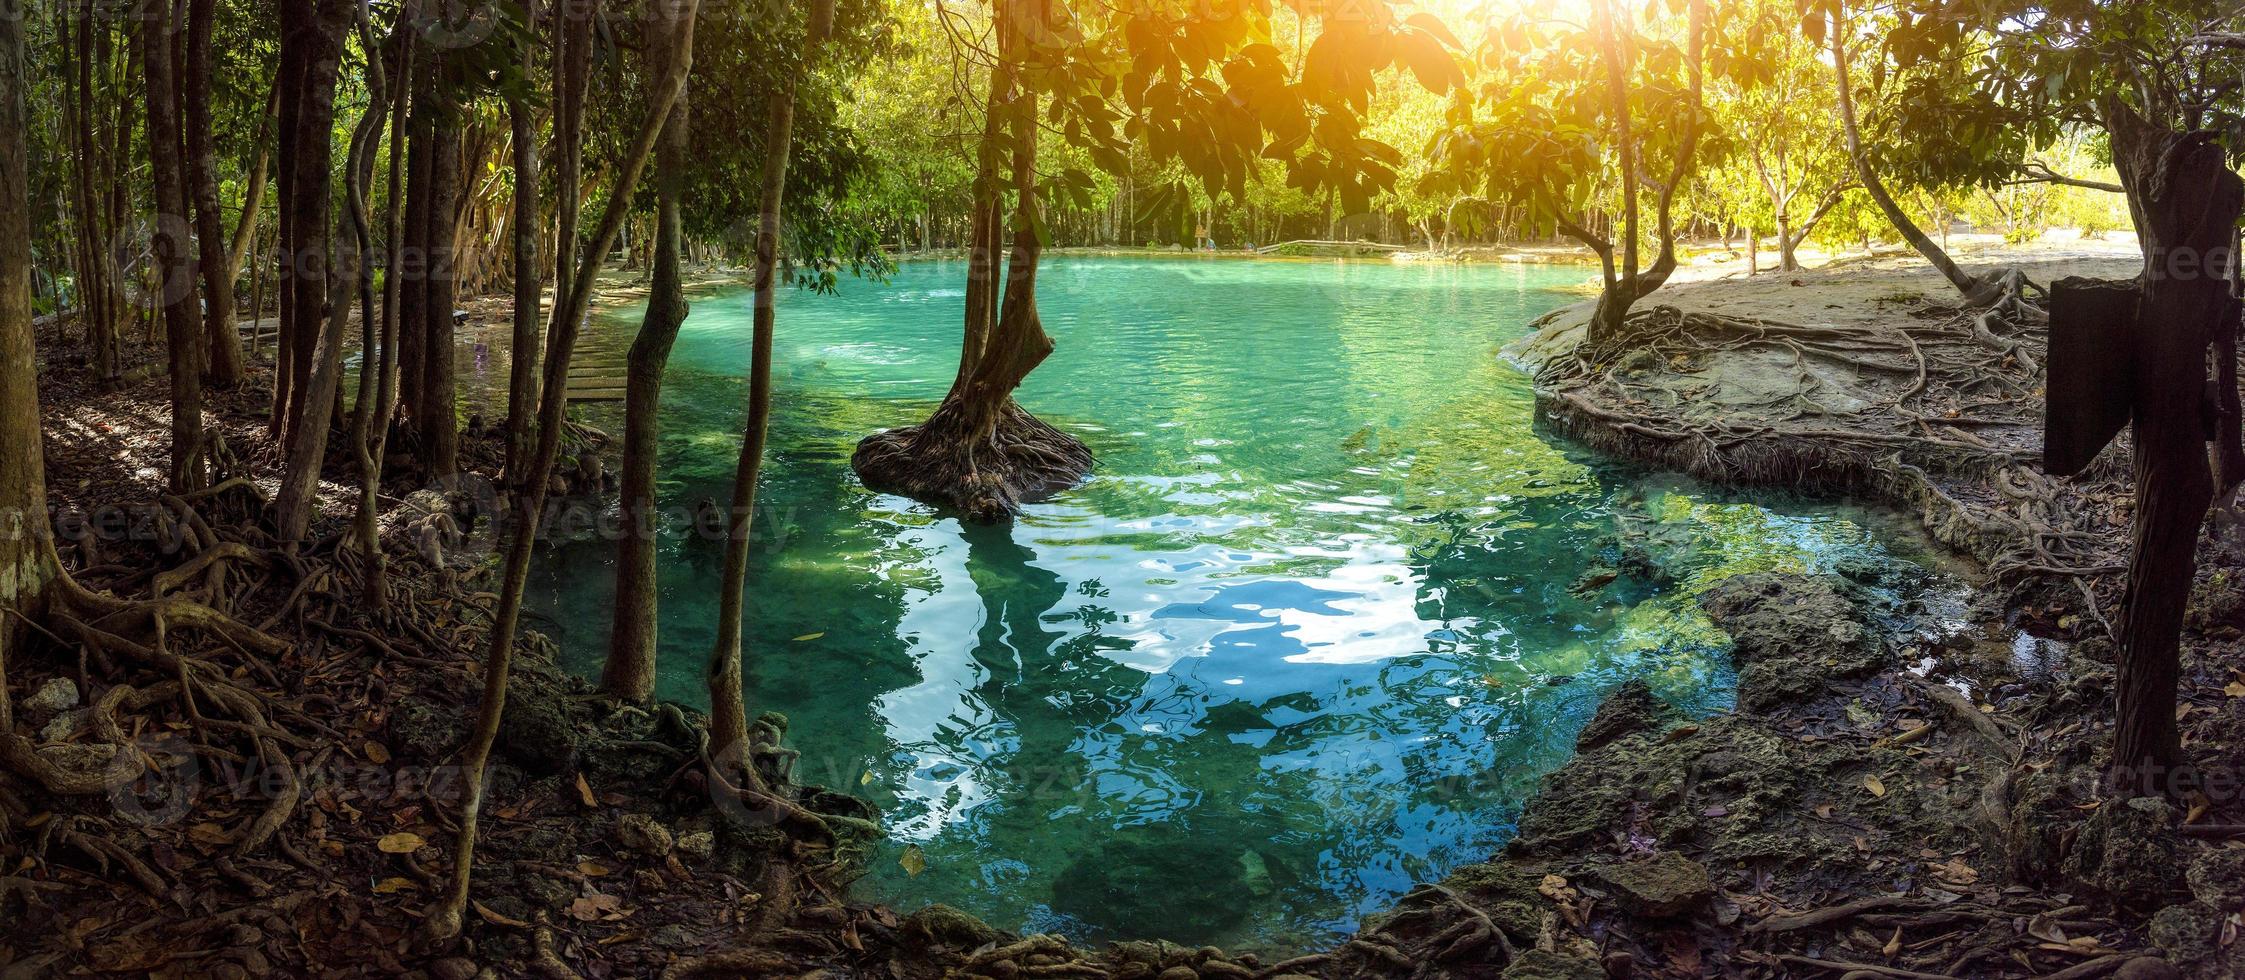 Mangrove forest and clear water canal at Emerald Pool Mangrove mangrove forest in Krabi province of Thailand photo